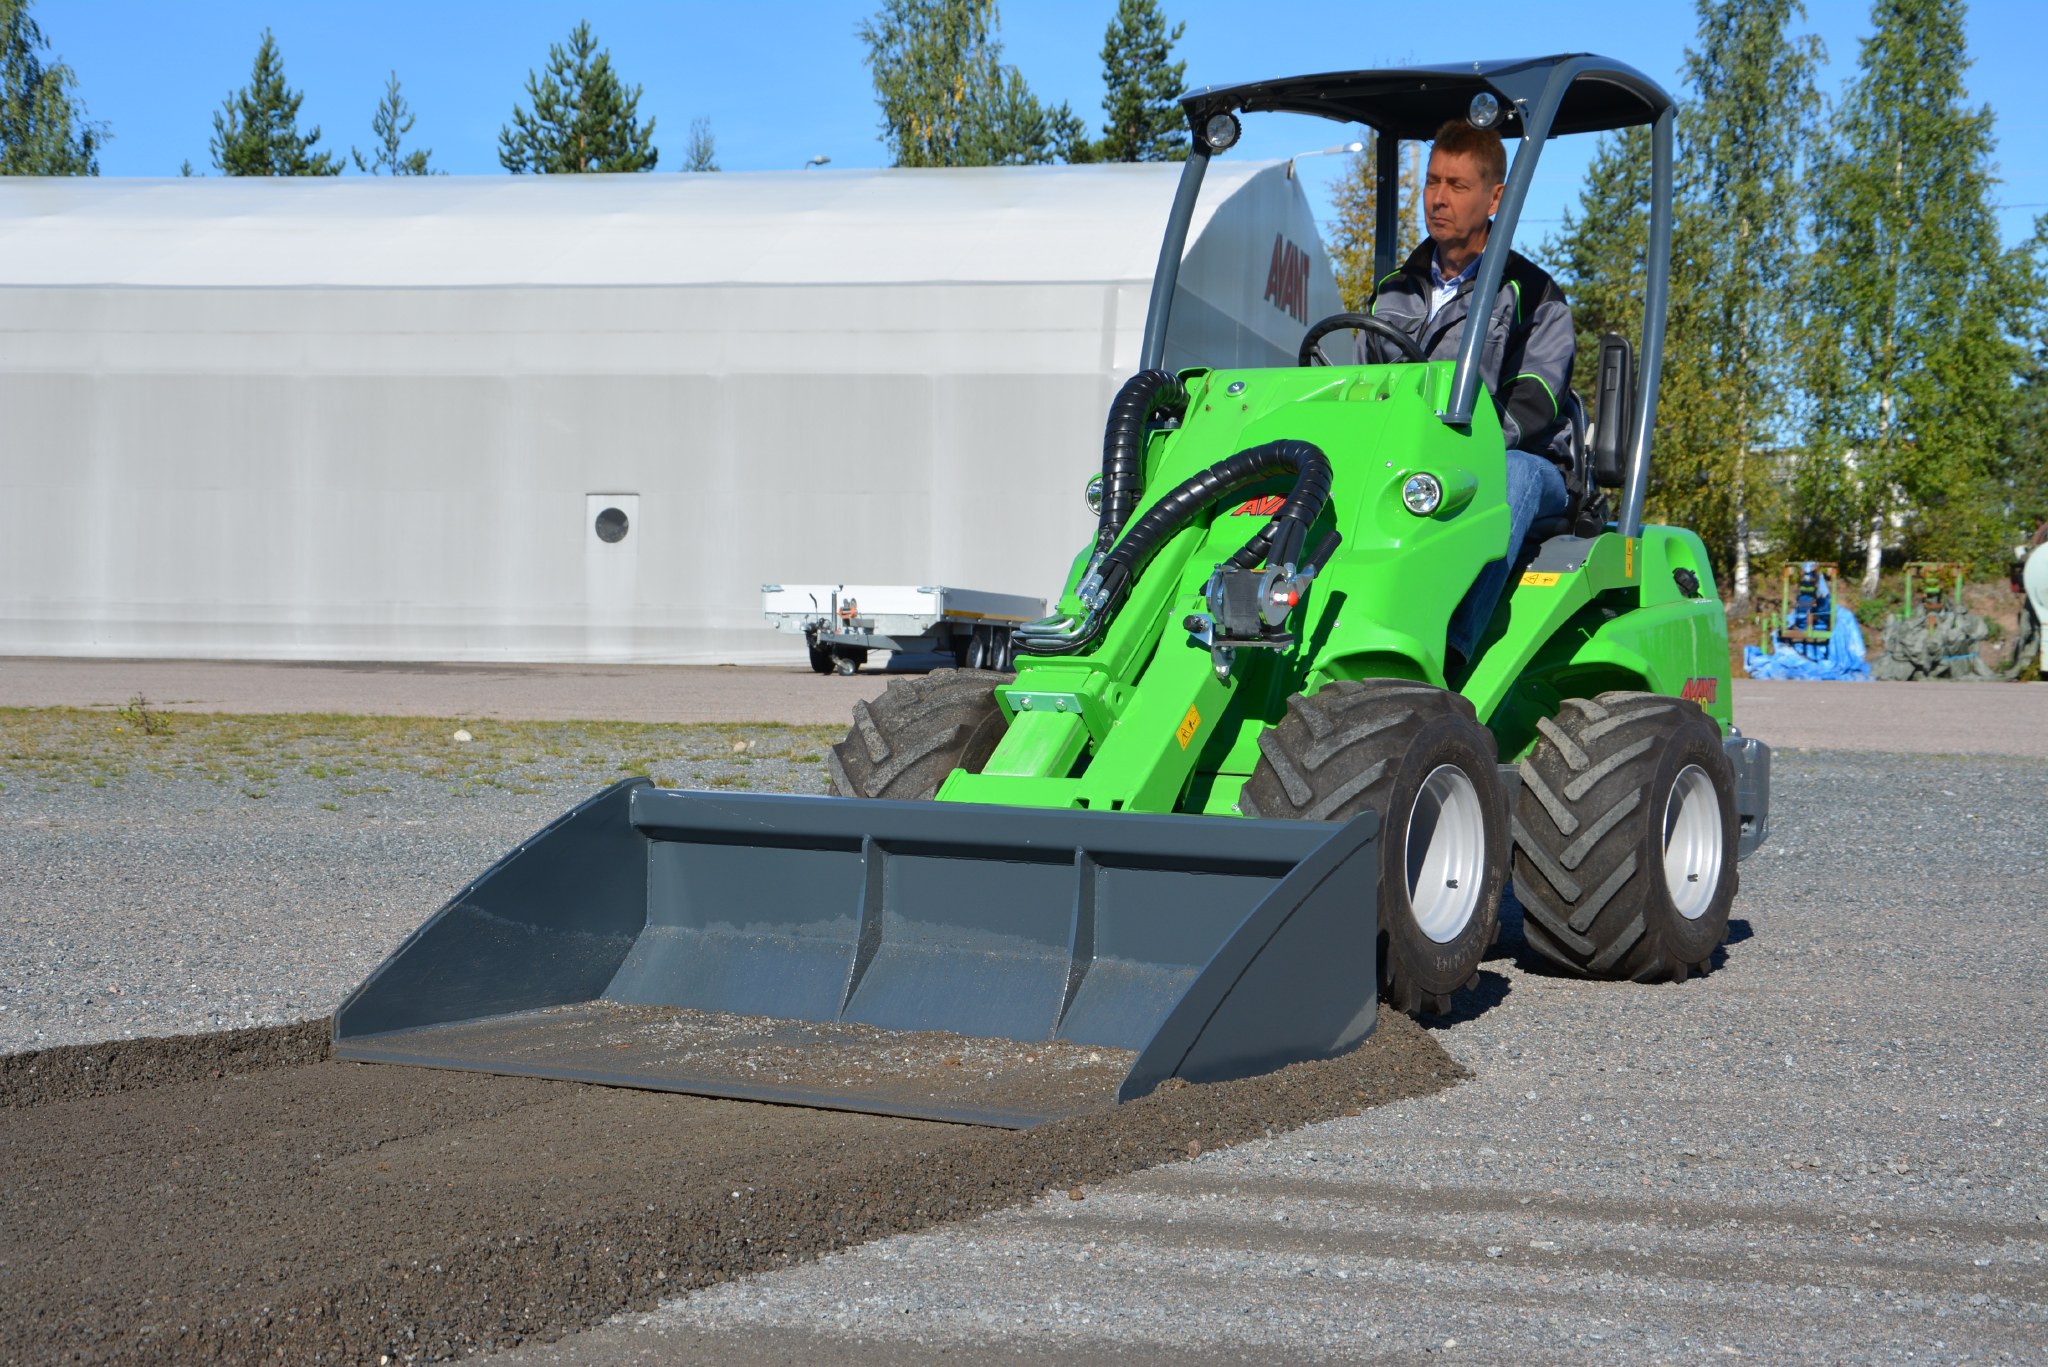 The Benefits of an Articulated Mini Loader